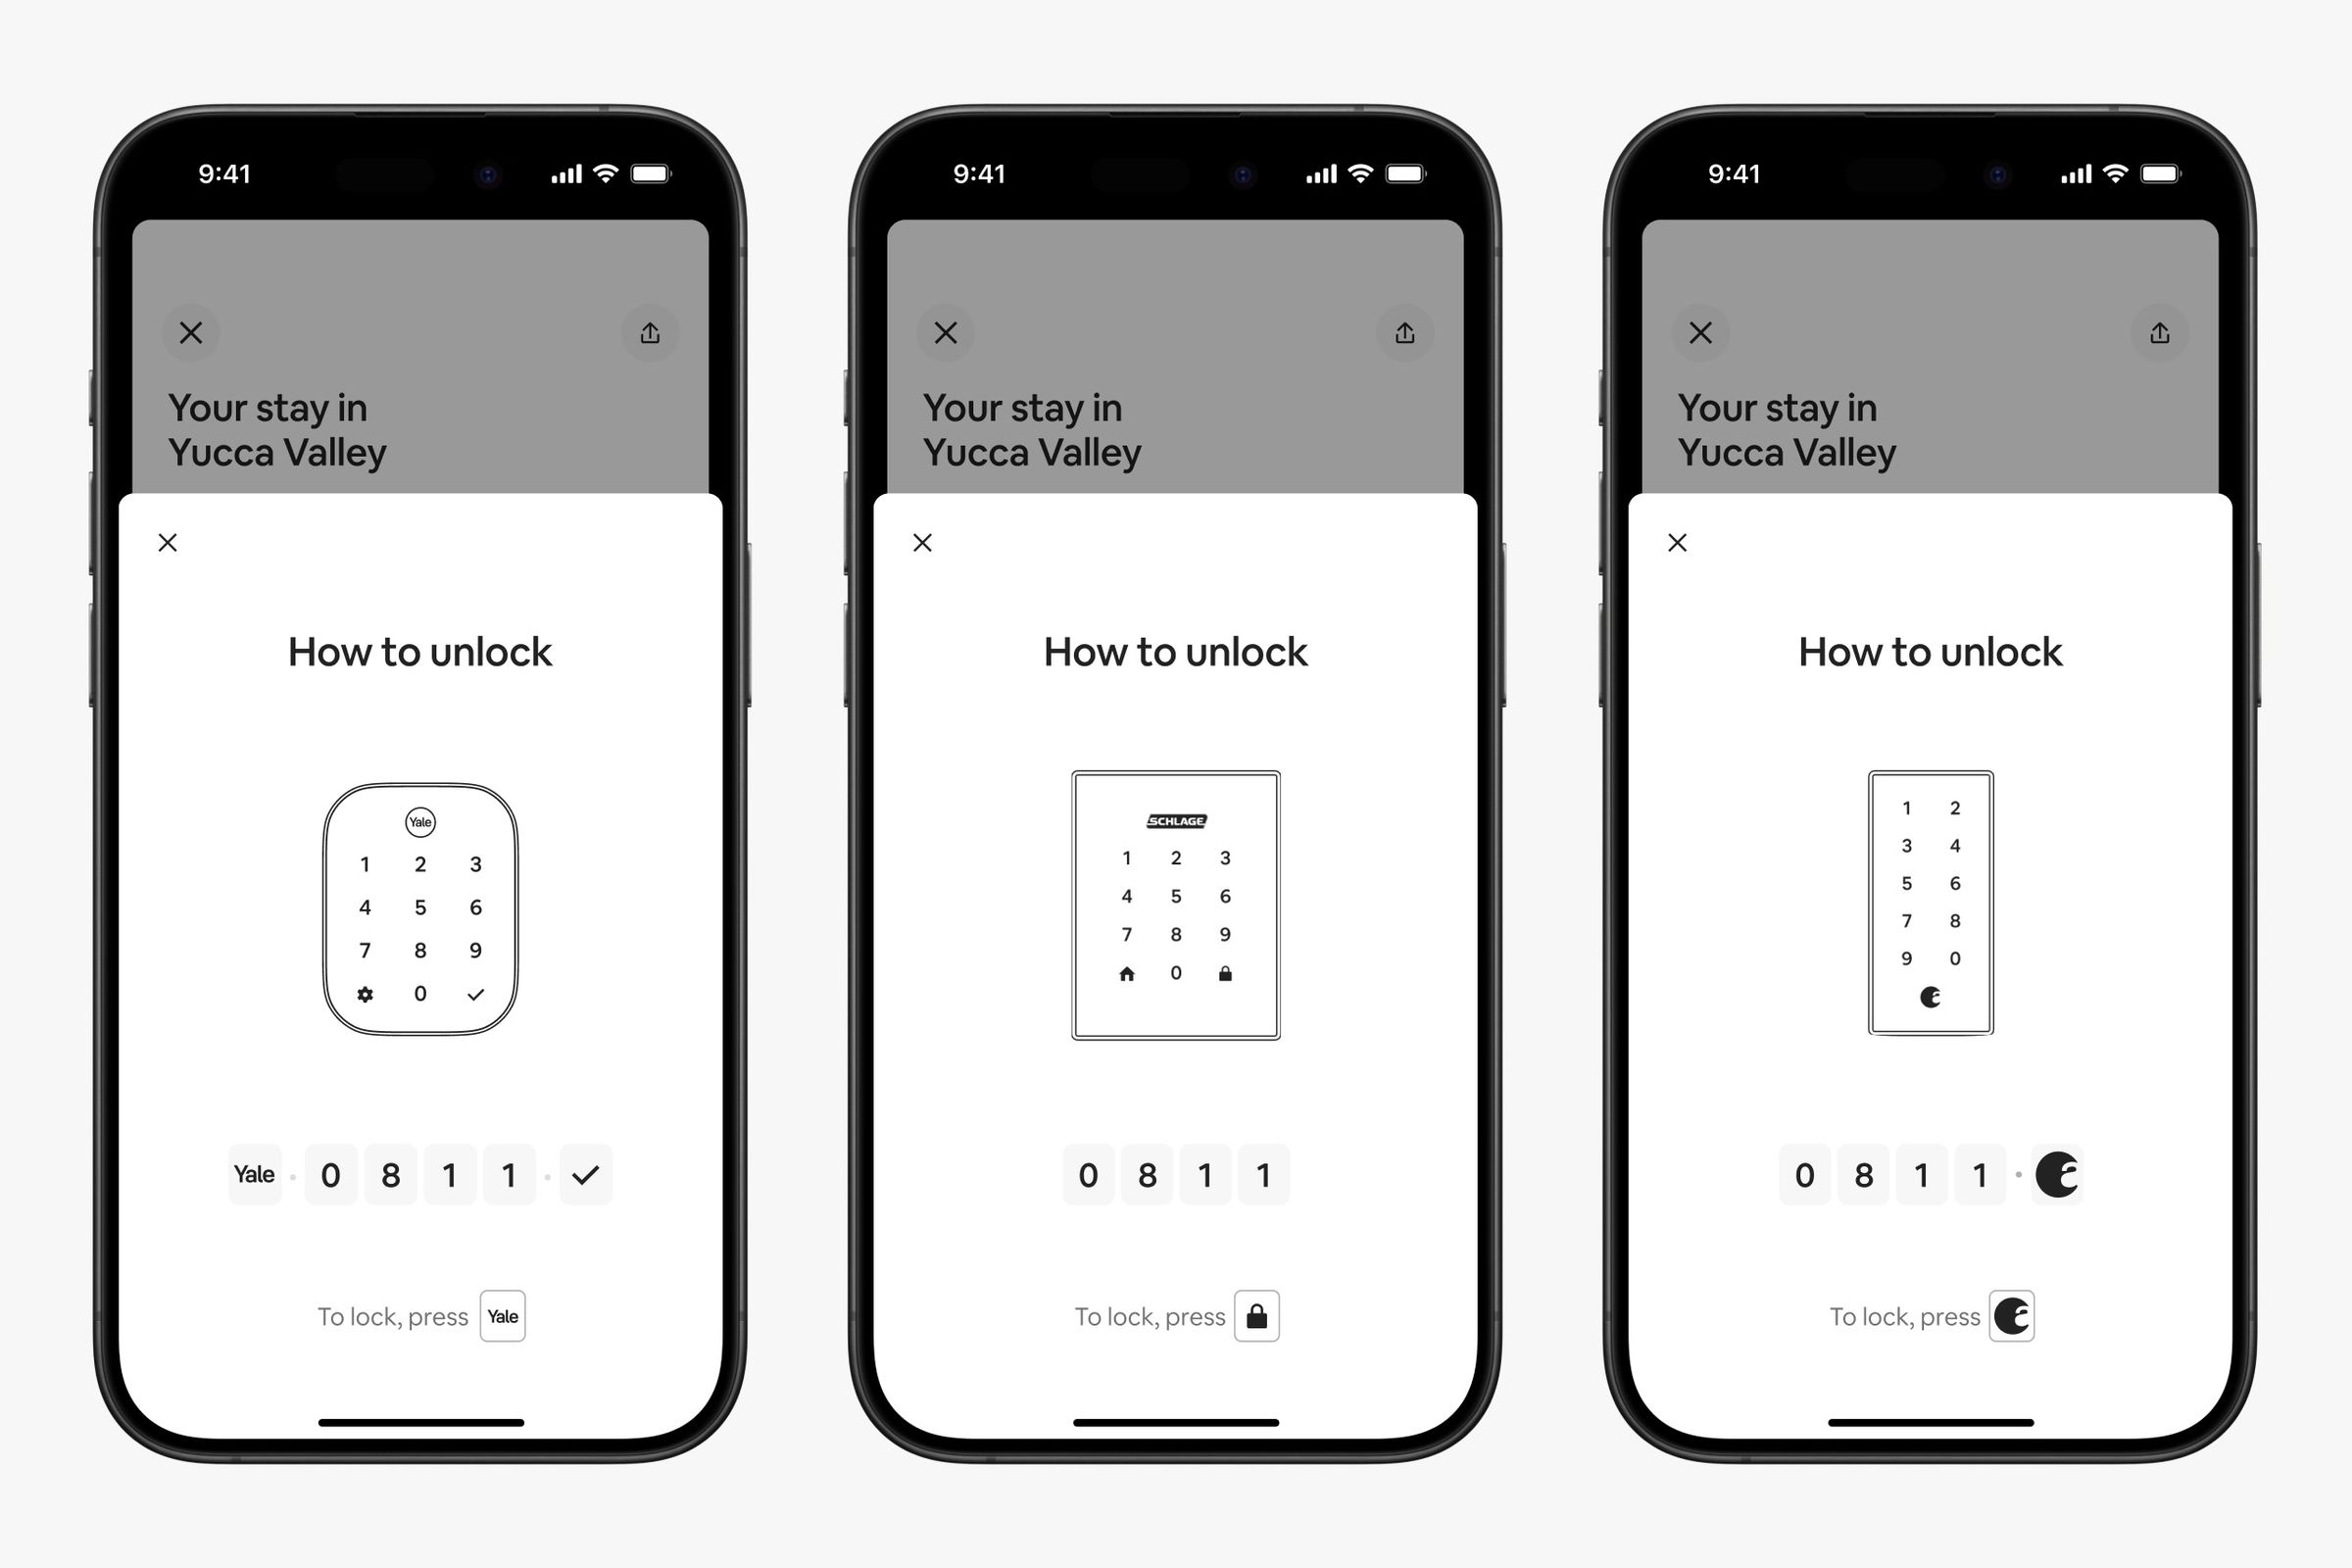 Three phone illustrations with Airbnb app showing “how to unlock” screens for different smart locks and instructions on how to enter the unlock code.